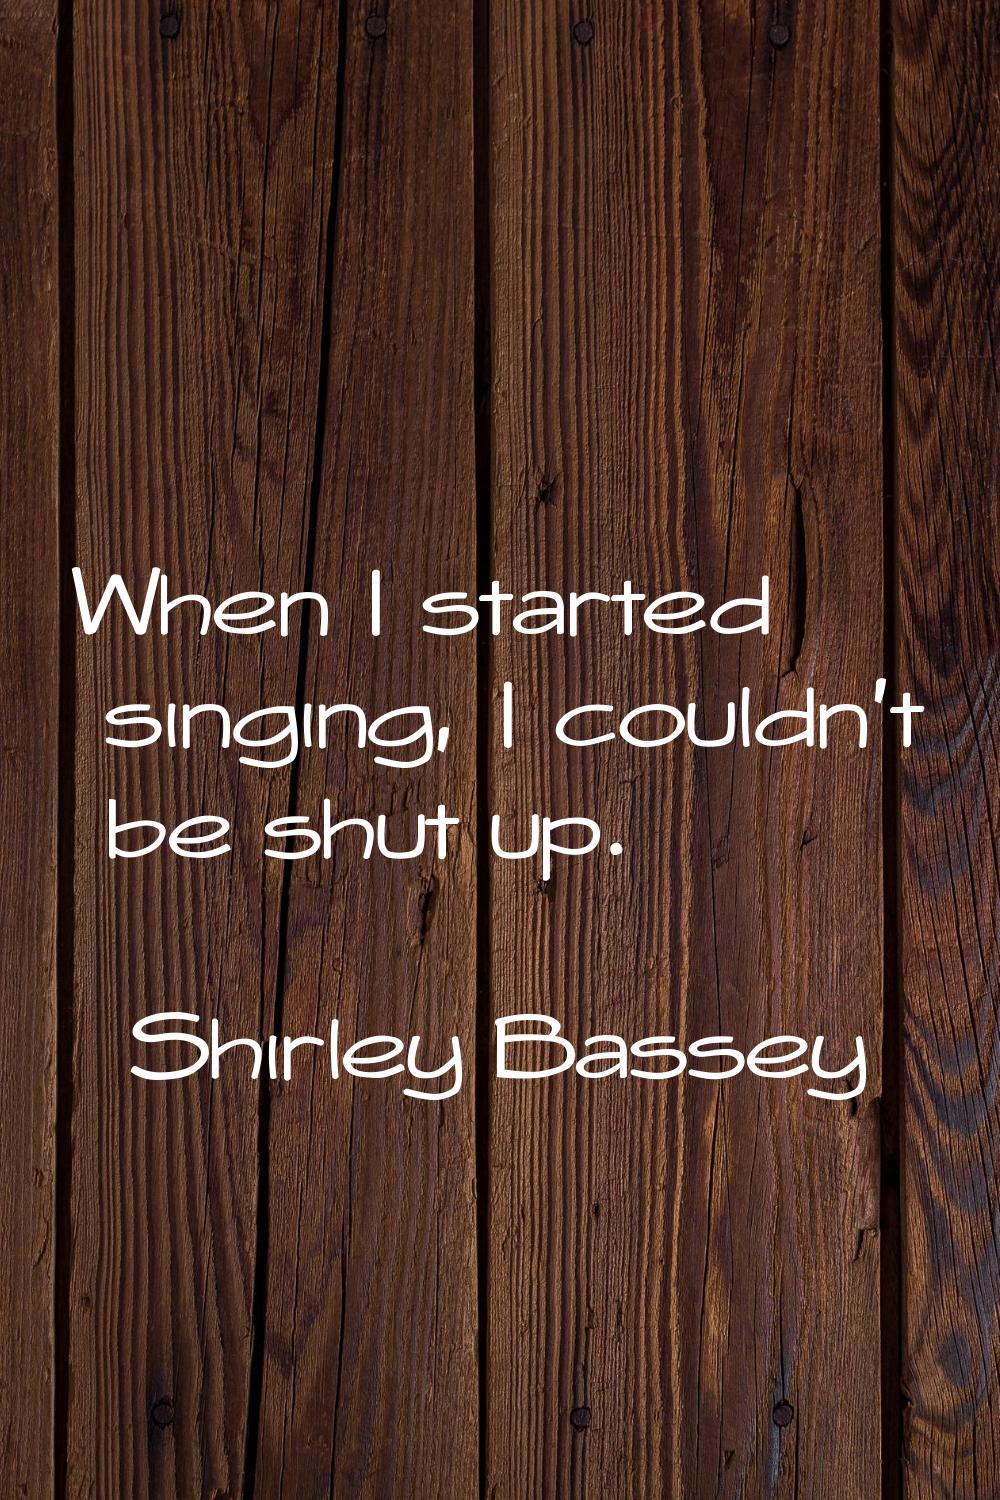 When I started singing, I couldn't be shut up.